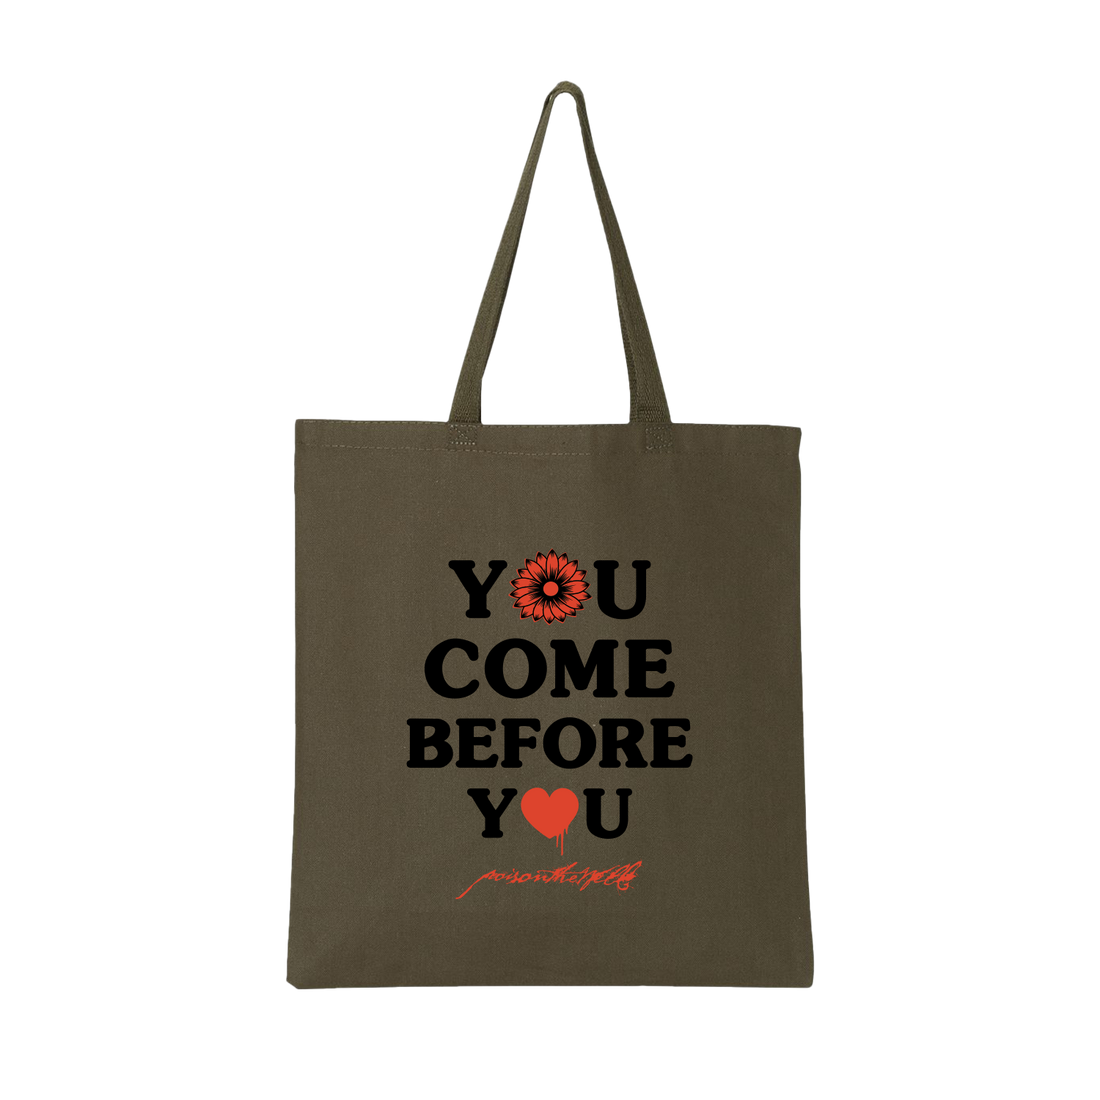 YCBY Tote